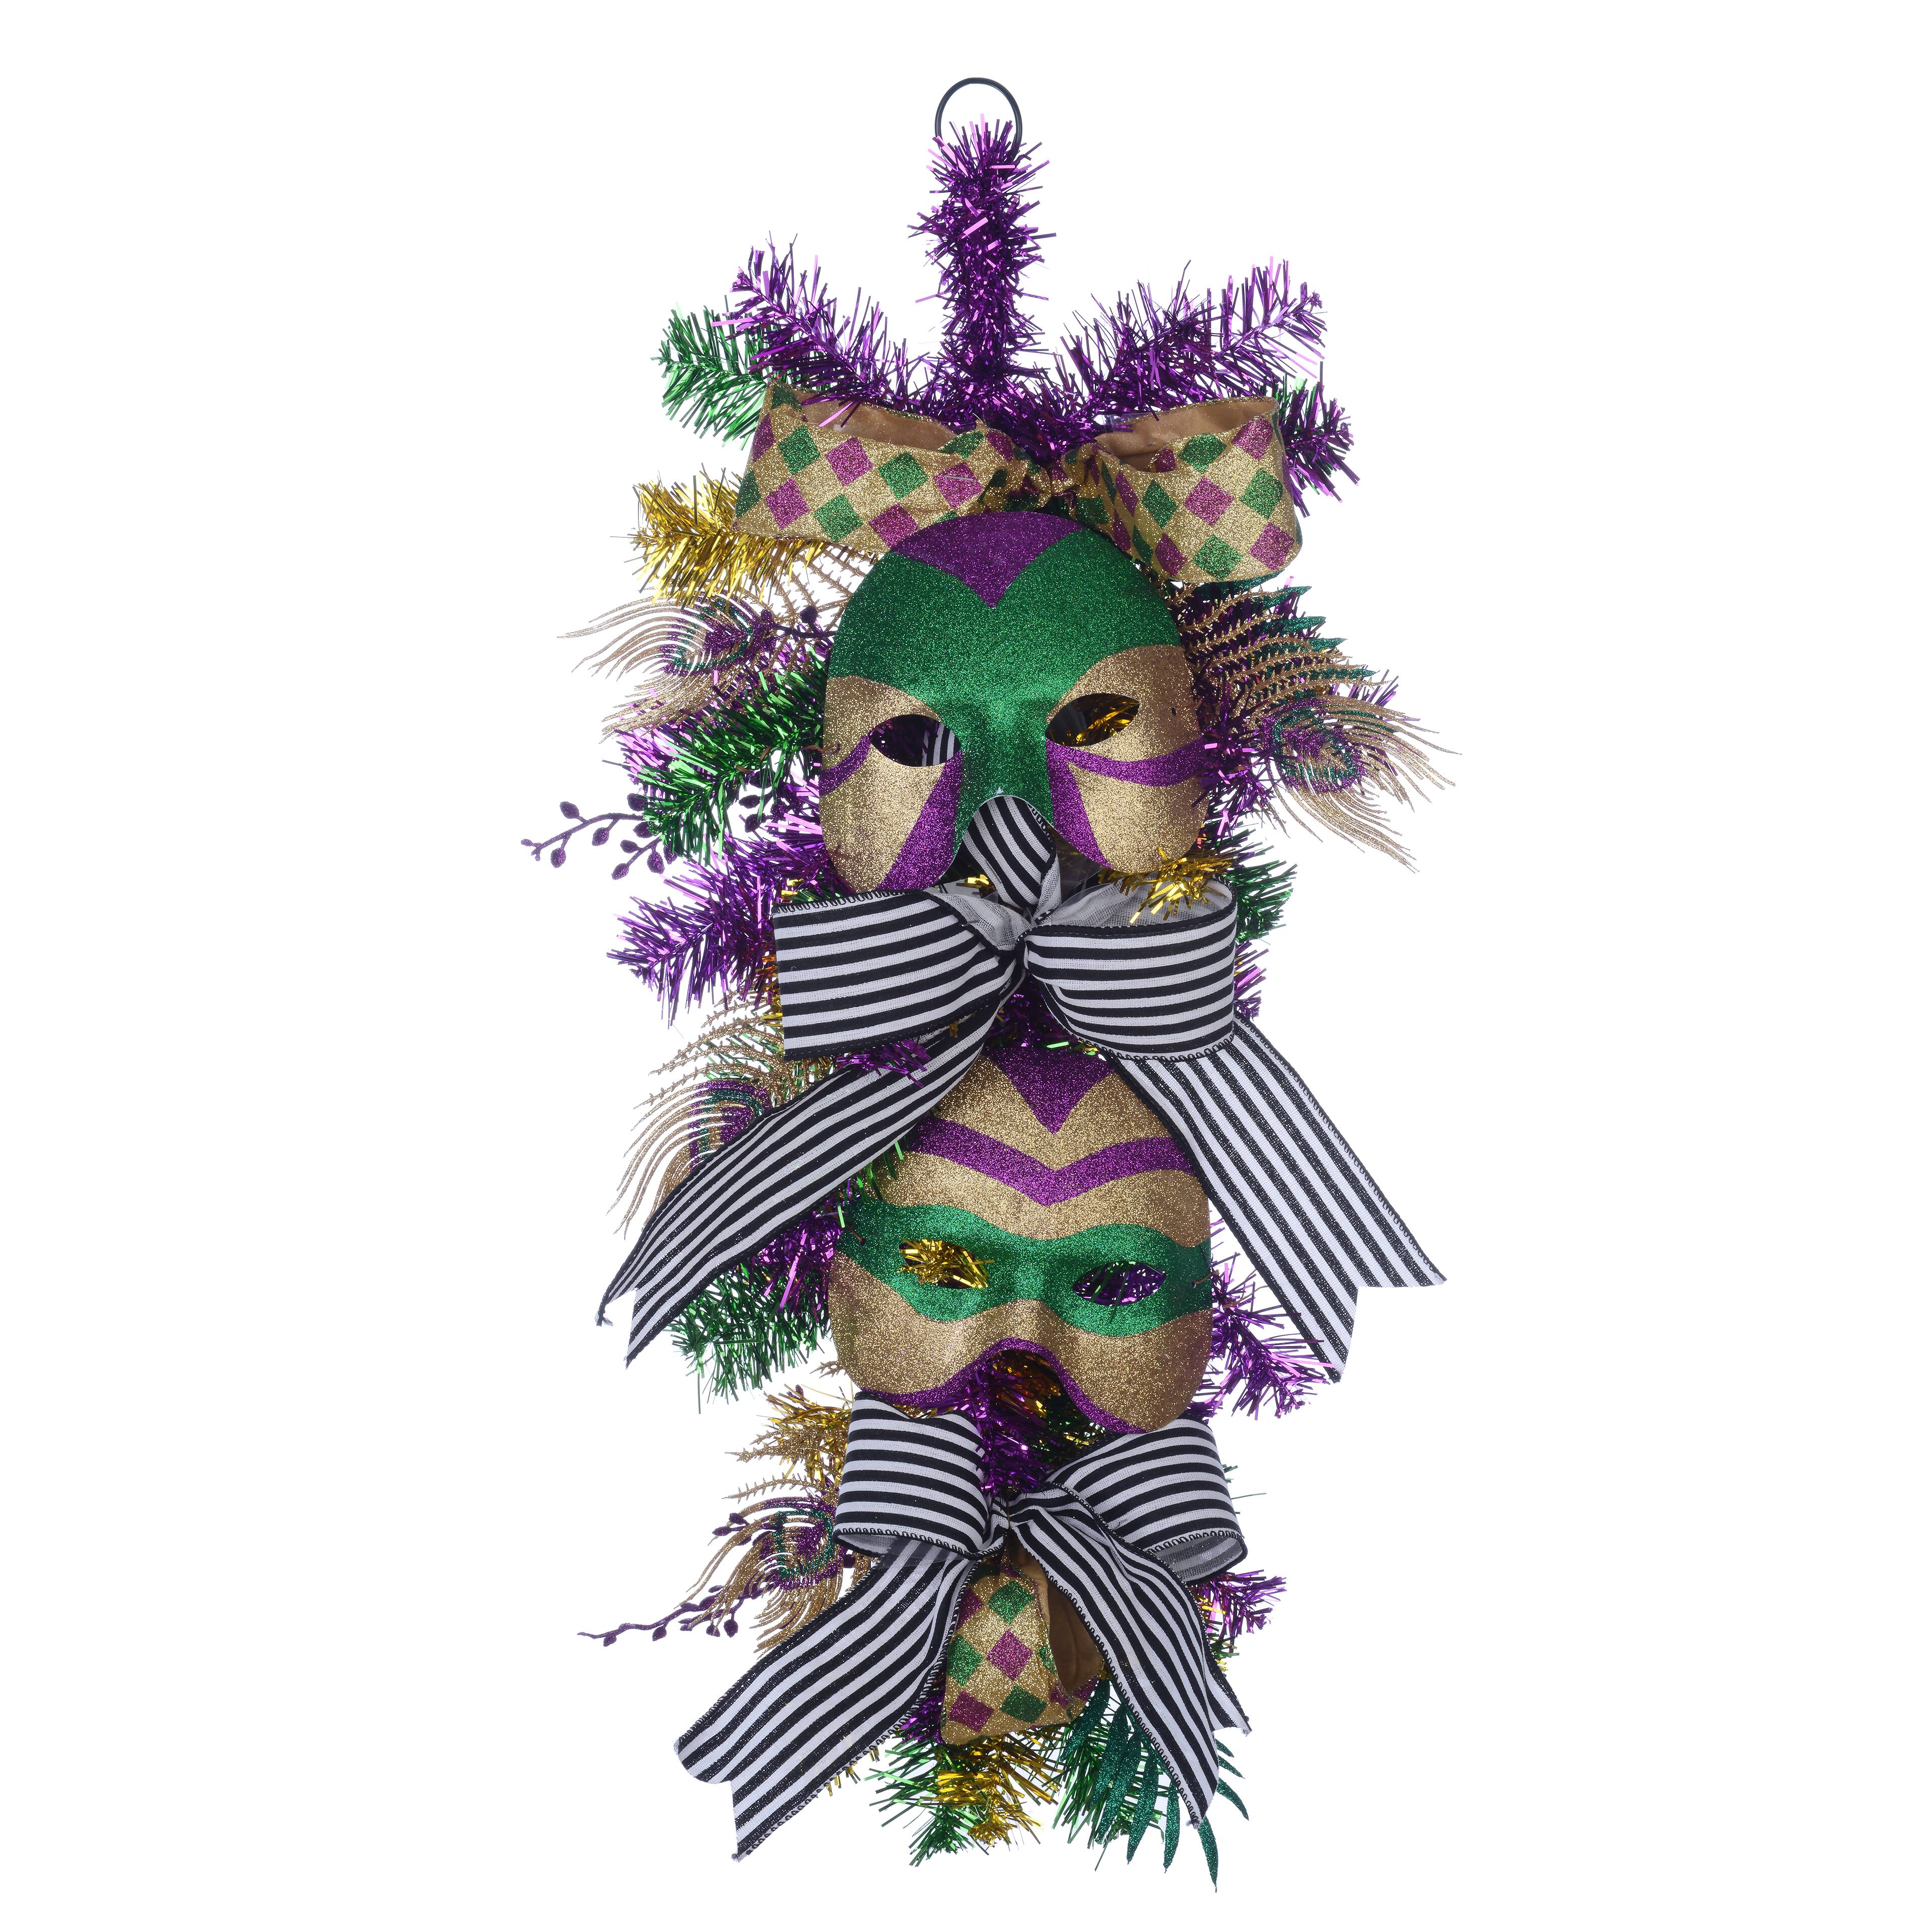 New Orleans Mardi Gras Mask Beads Feathers Green Fabric 2270 